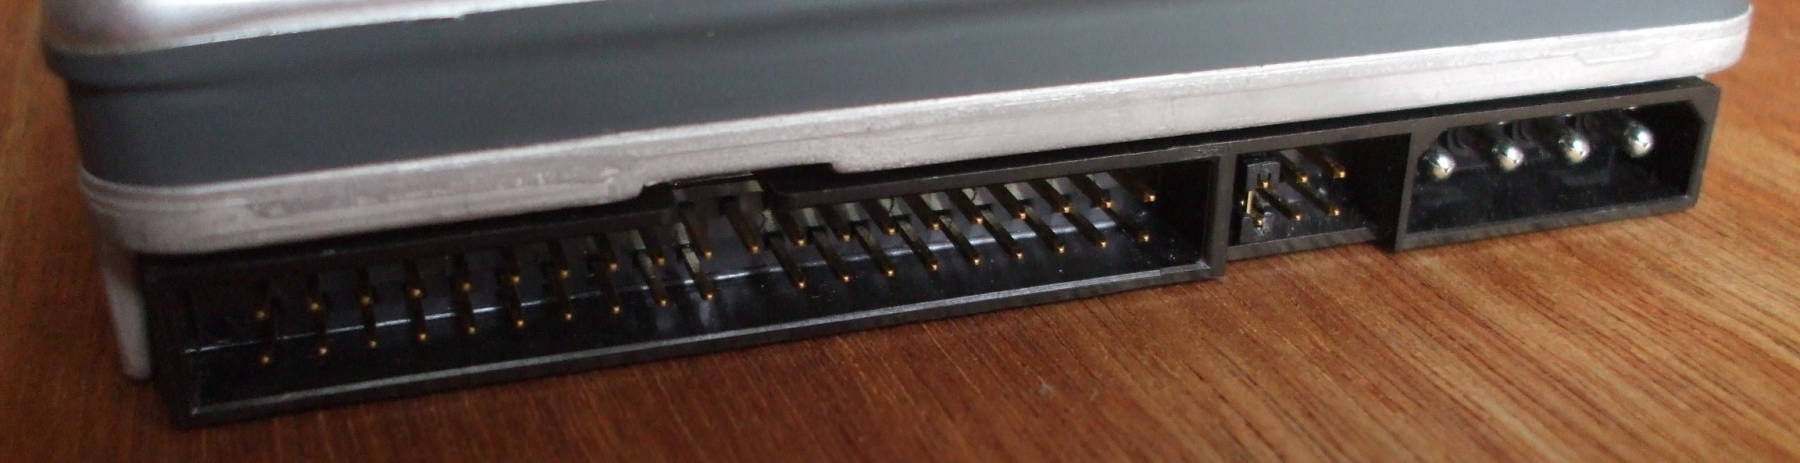 PATA data connector and power connector on a 3.5 inch PATA disk.